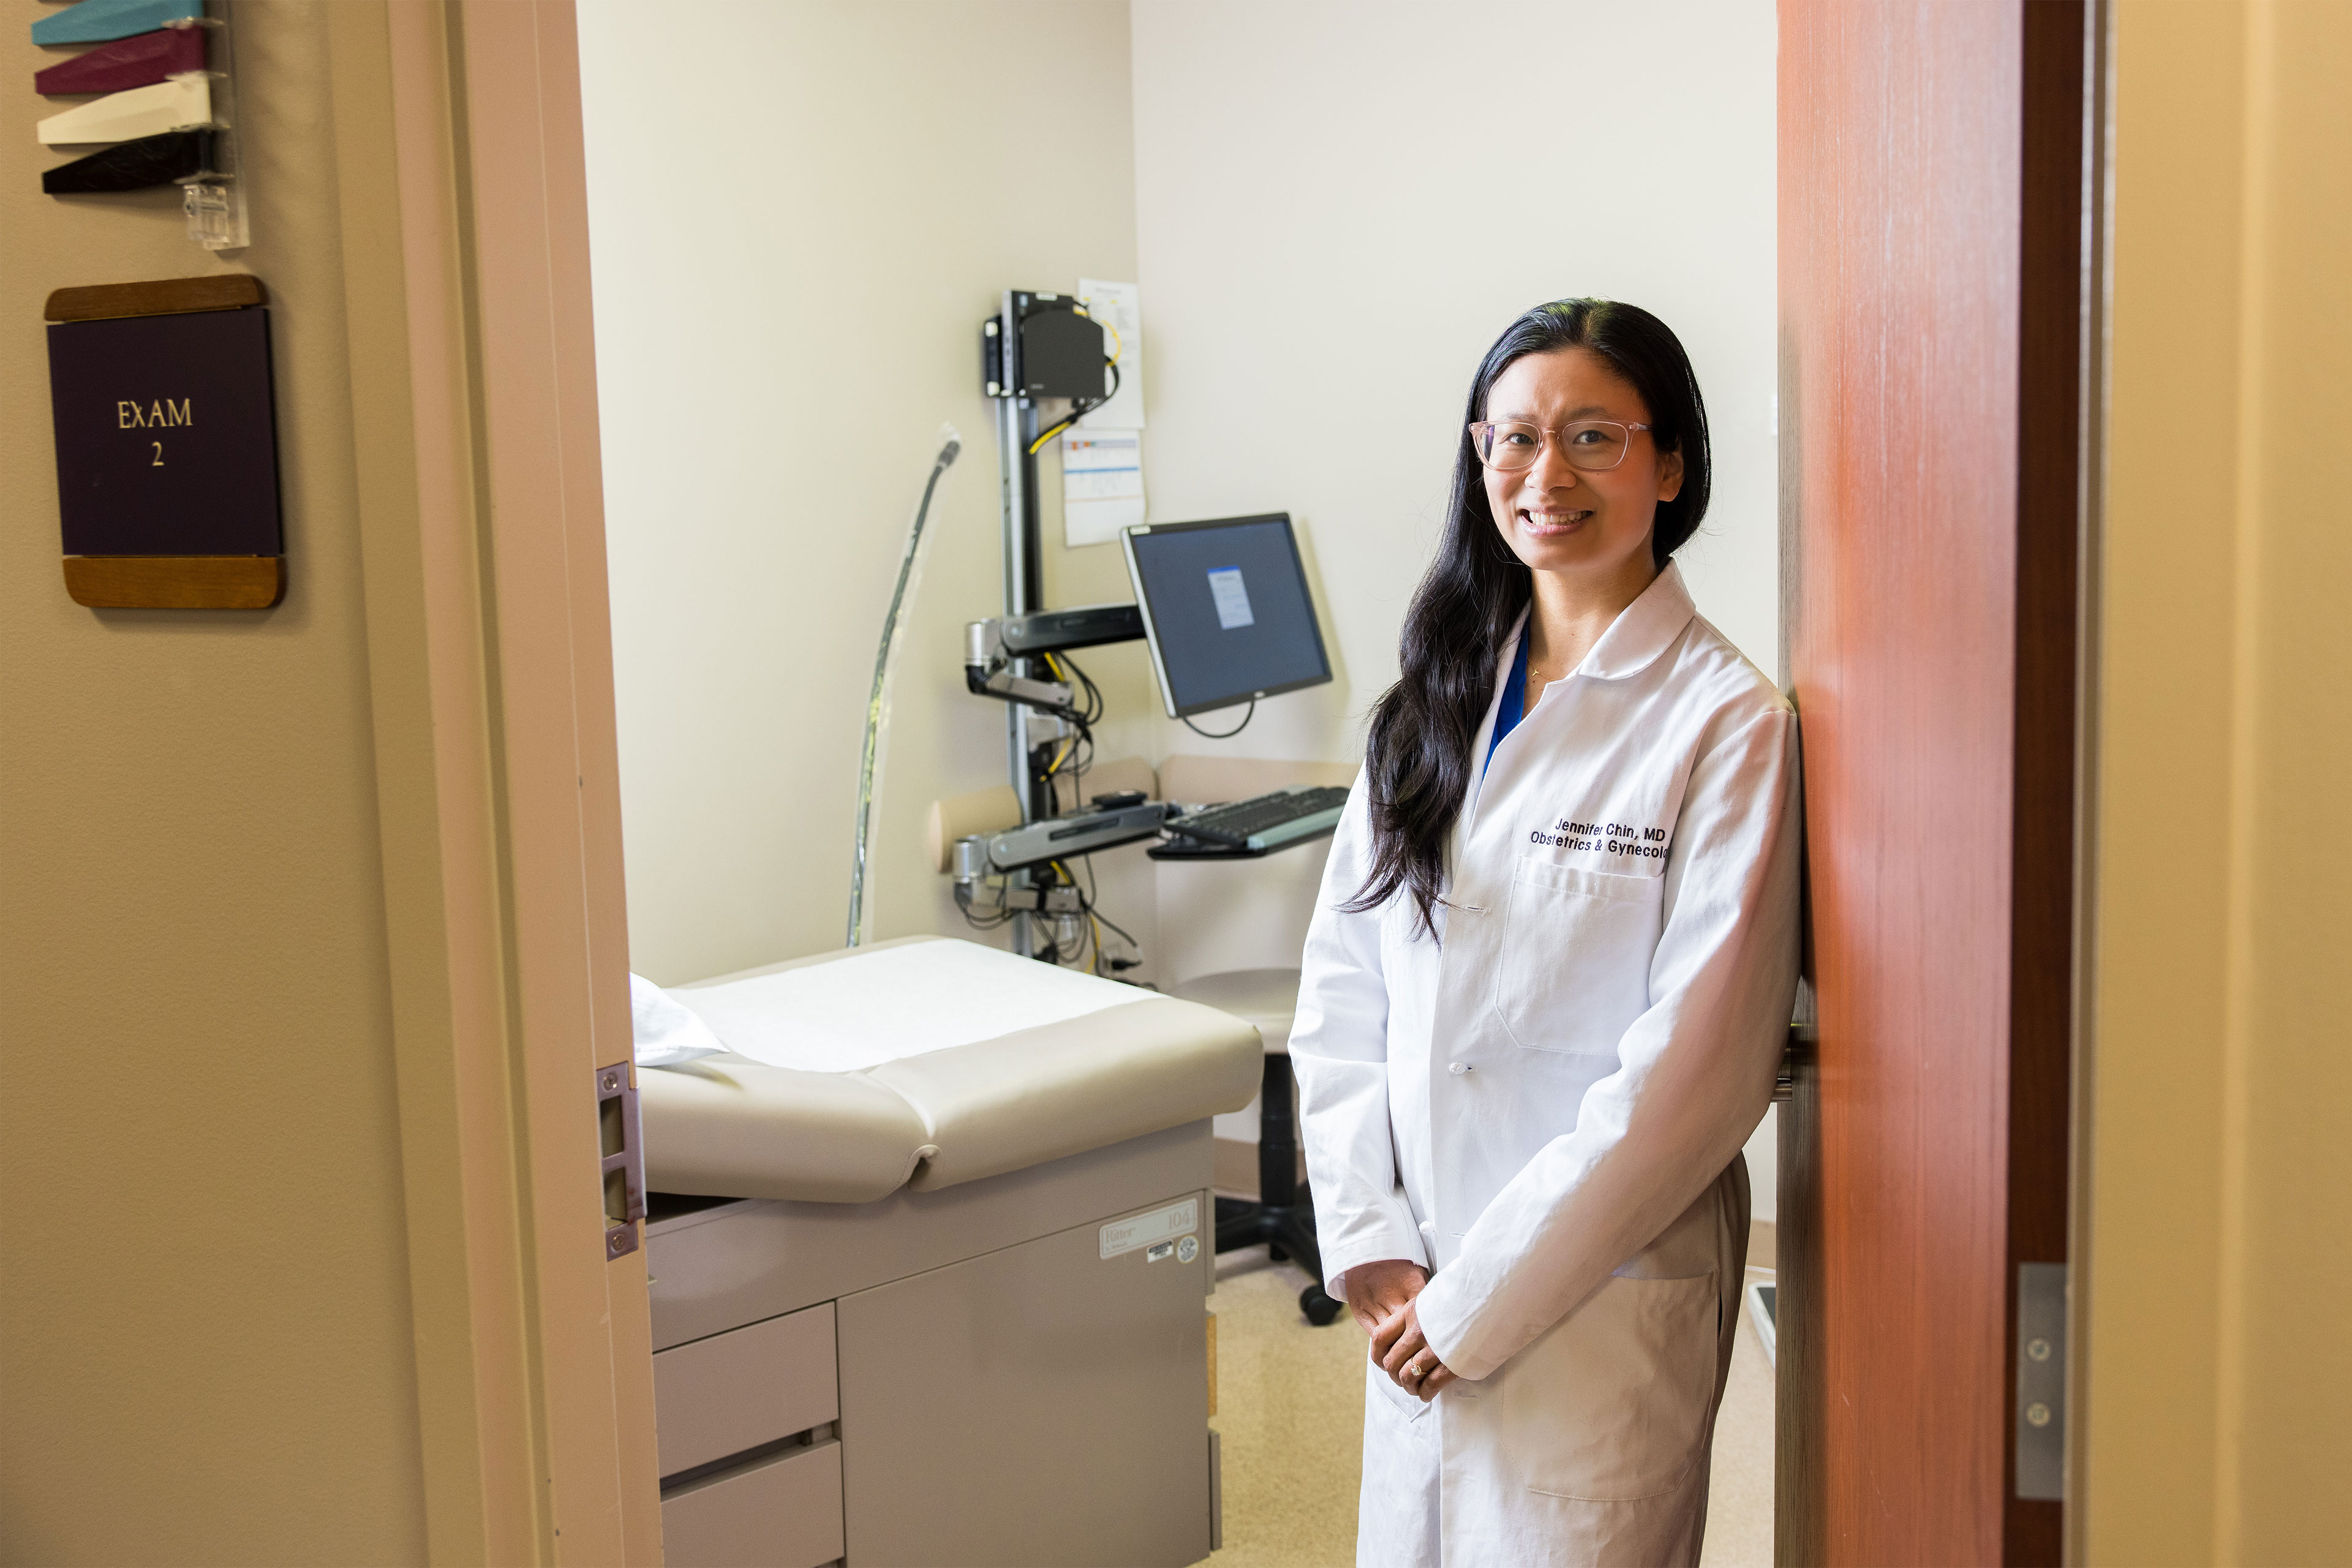 A woman with long dark hair and wearing glasses and a white doctor's coat stands just inside the doorway of an exam room. 